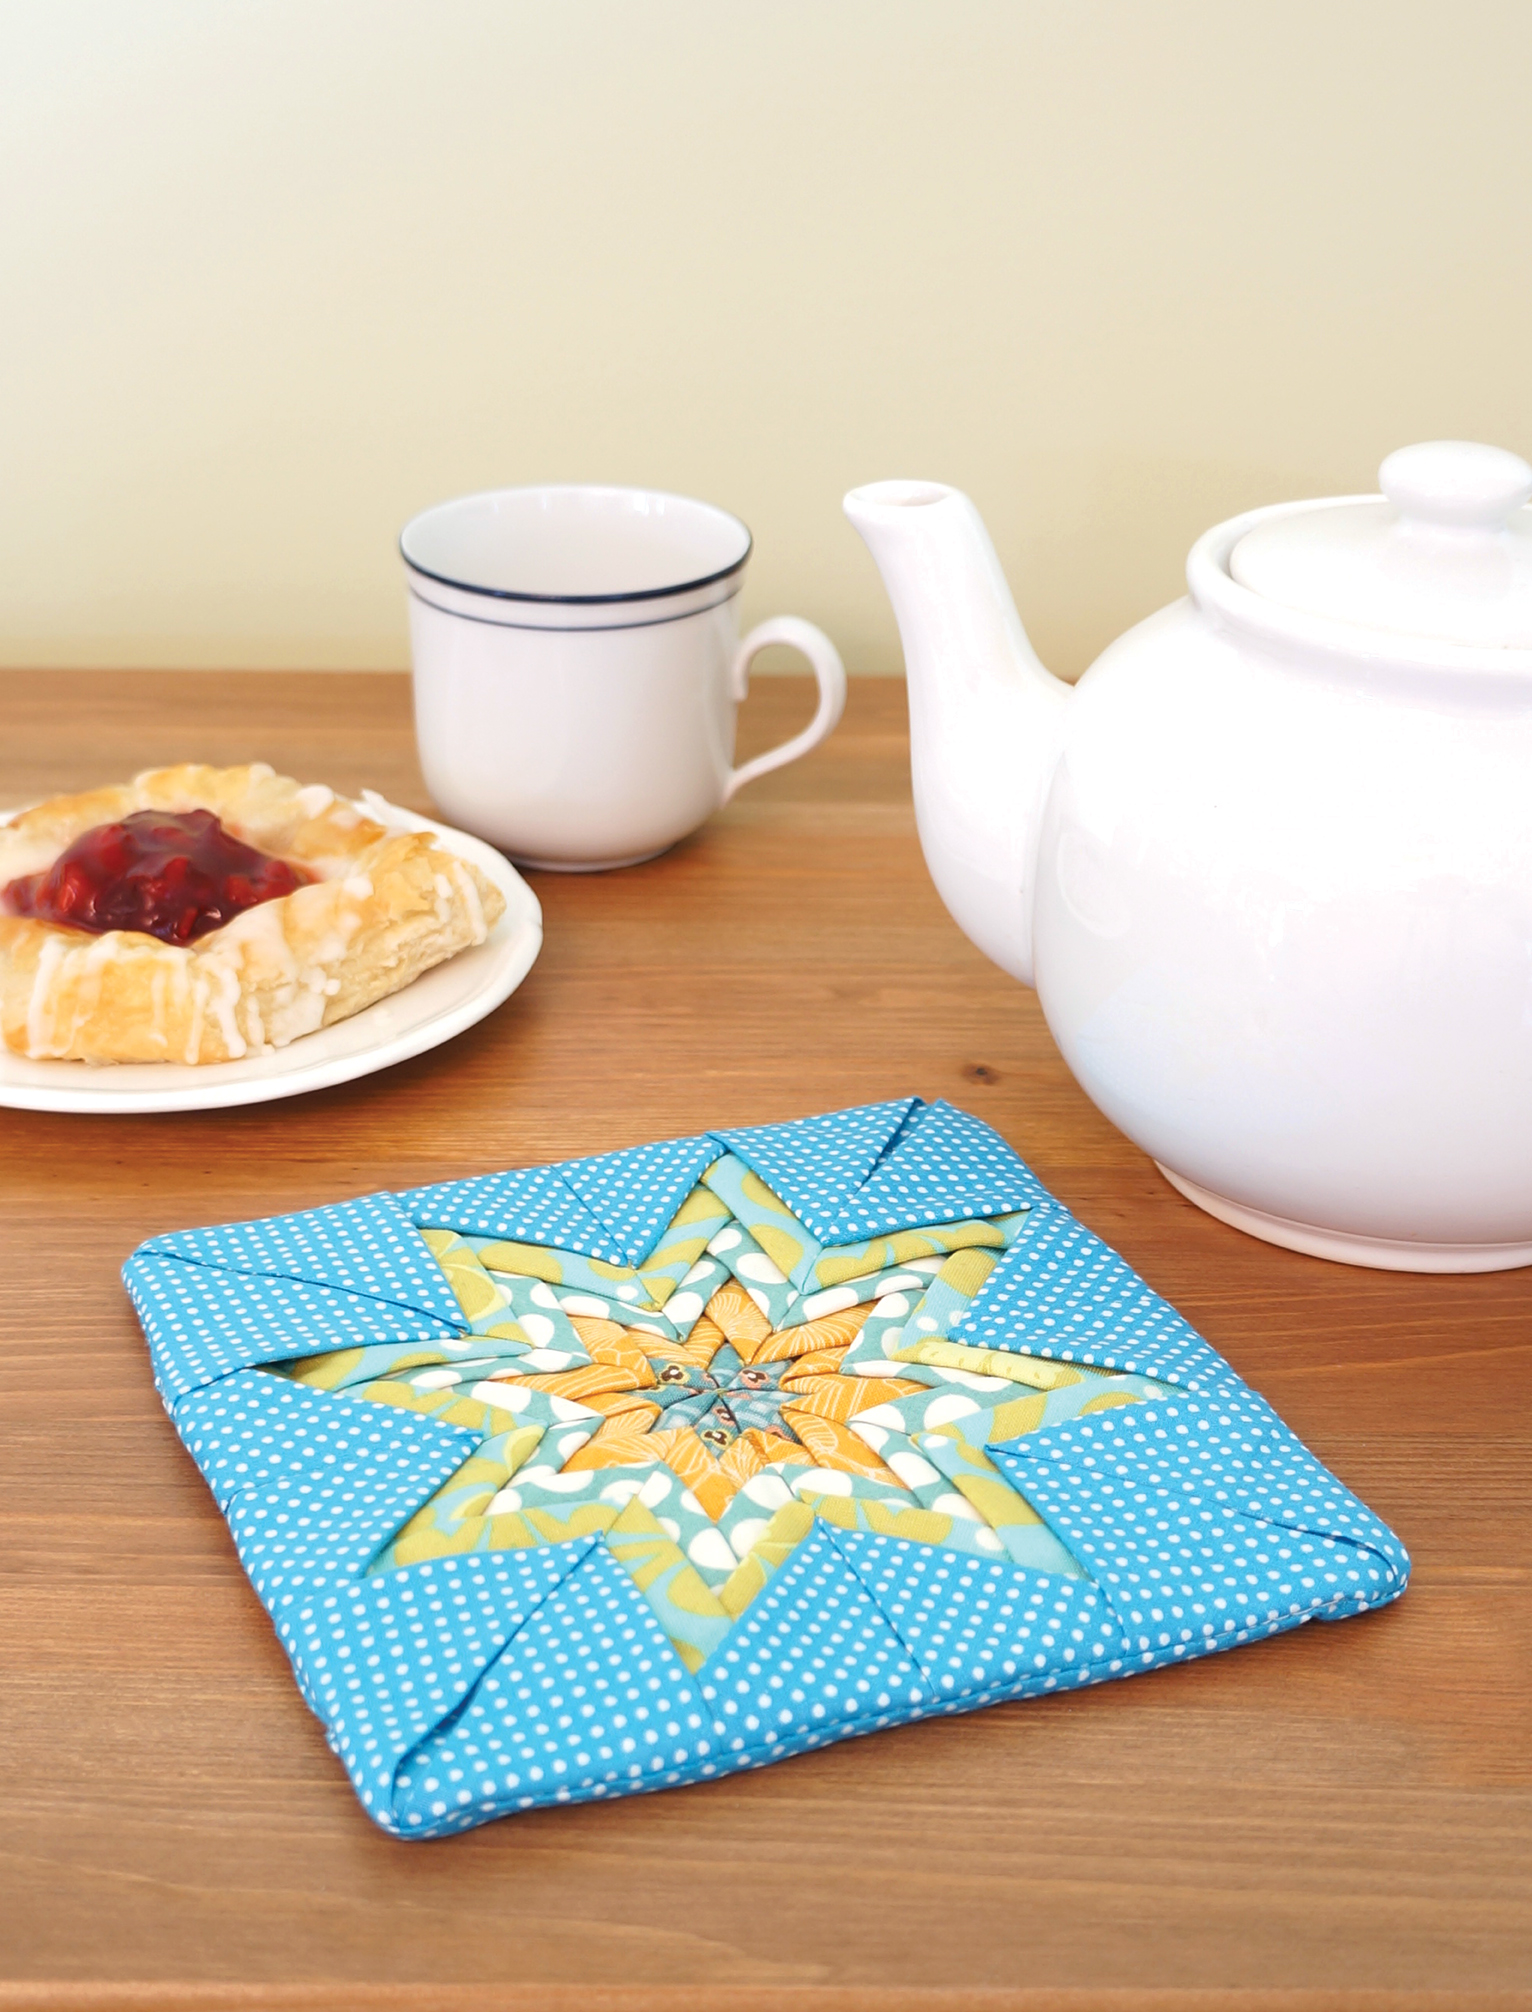 pretty little potholder tutorial :: a DIY step-by-step guide